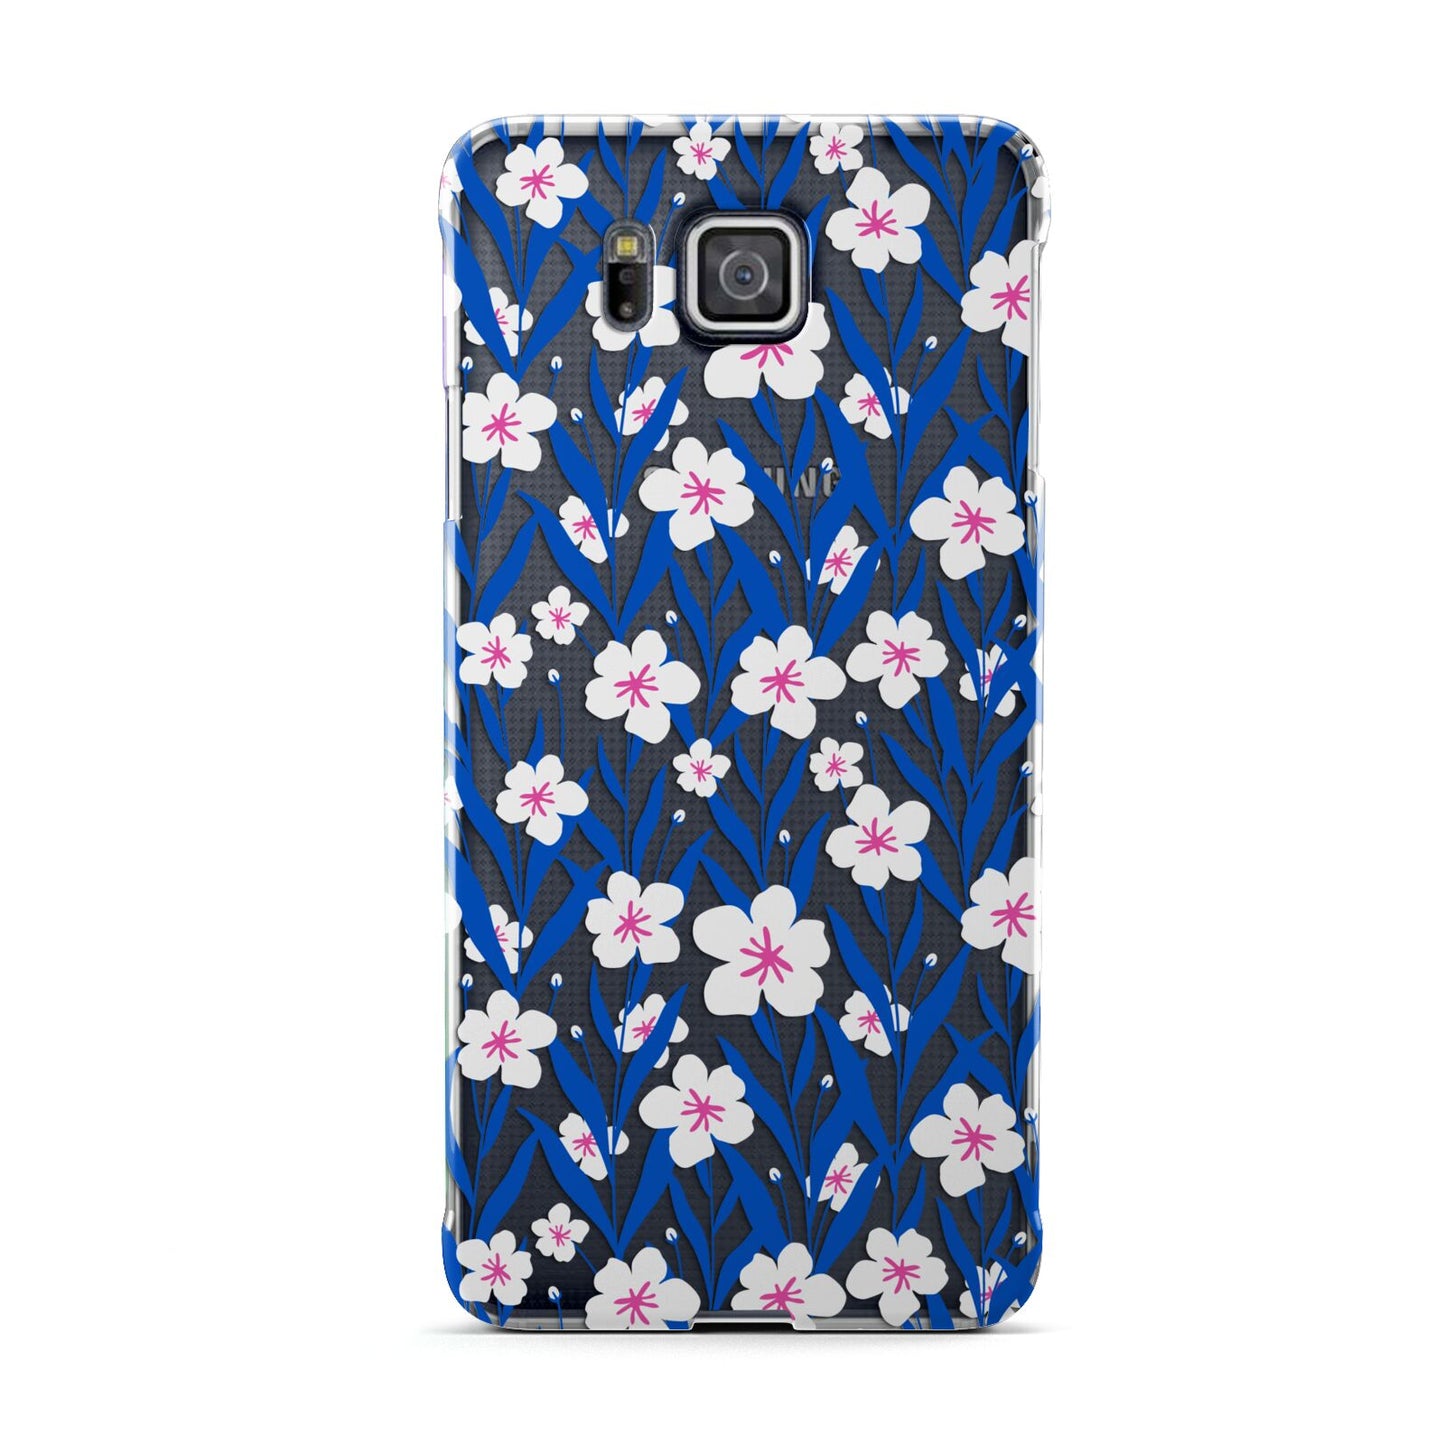 Blue and White Flowers Samsung Galaxy Alpha Case